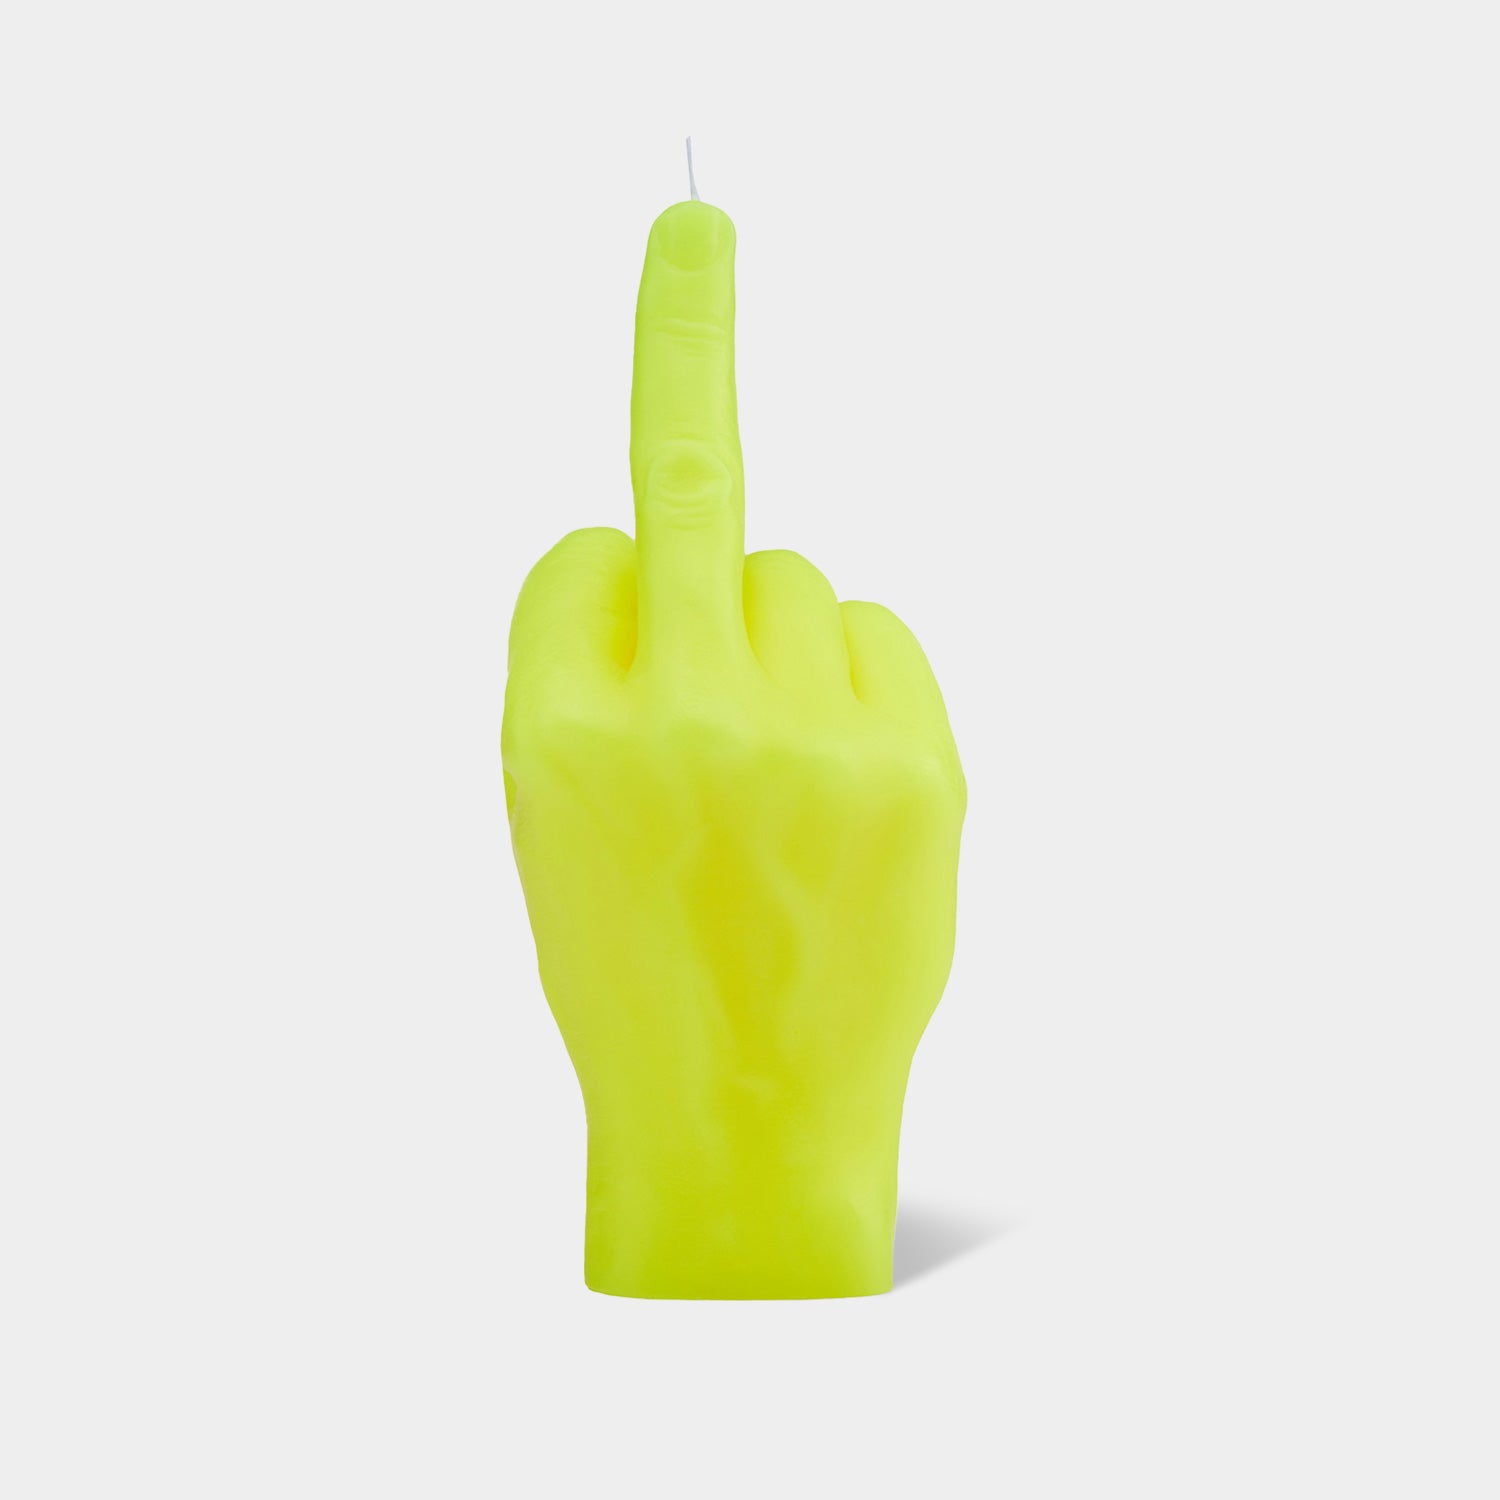 CandleHand "Fcuk You" Candle - Neon Yellow